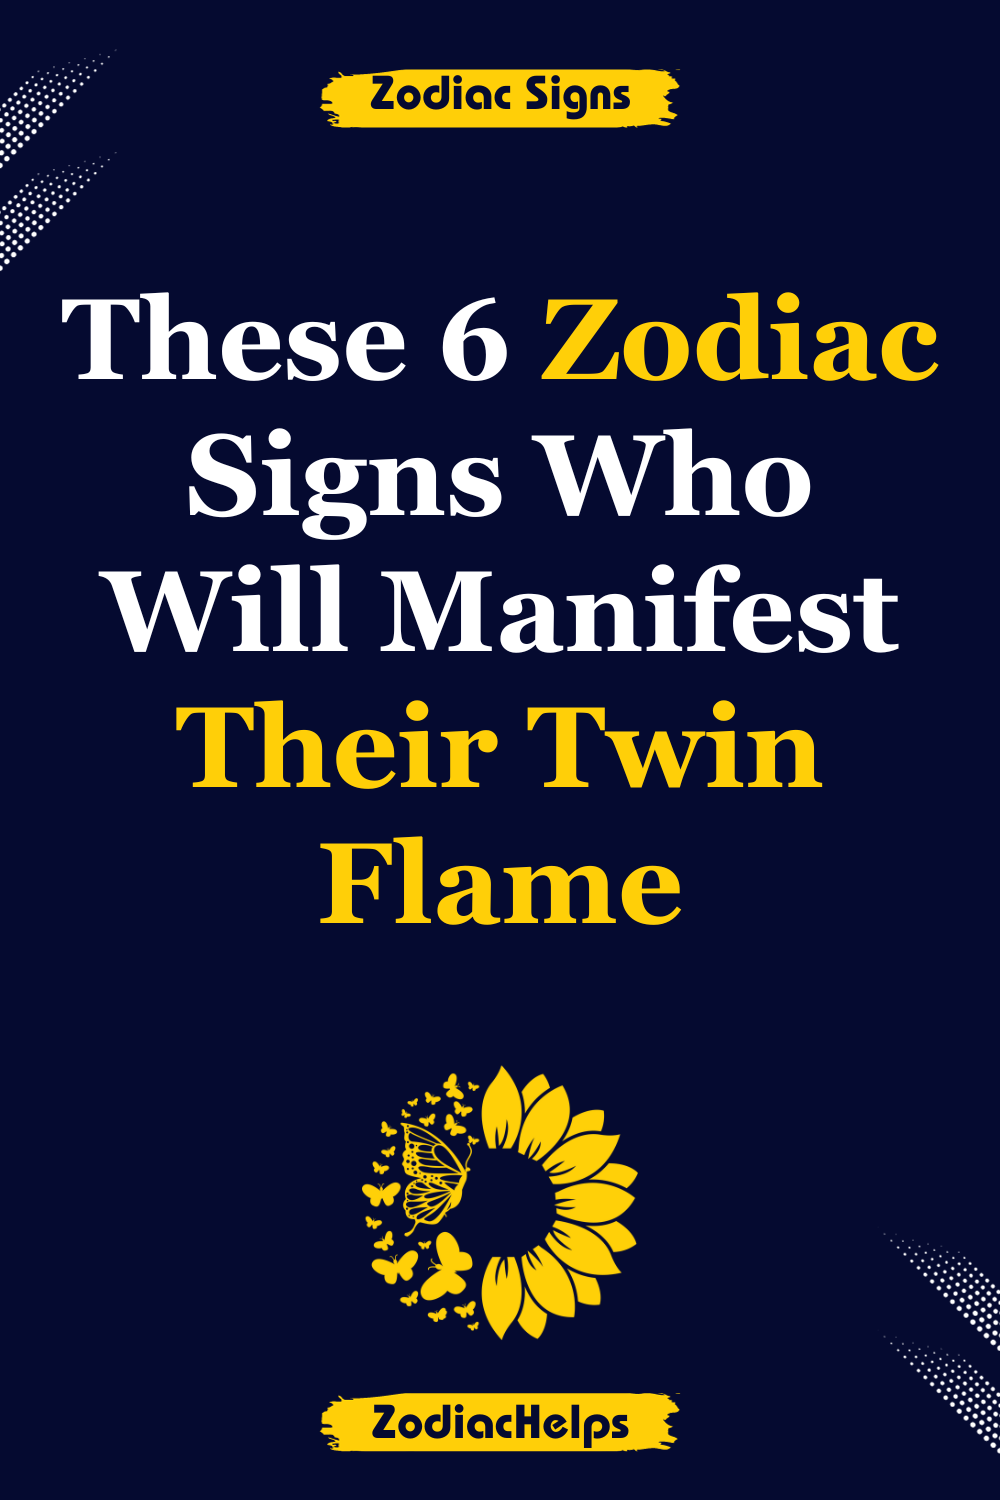 These 6 Zodiac Signs Who Will Manifest Their Twin Flame